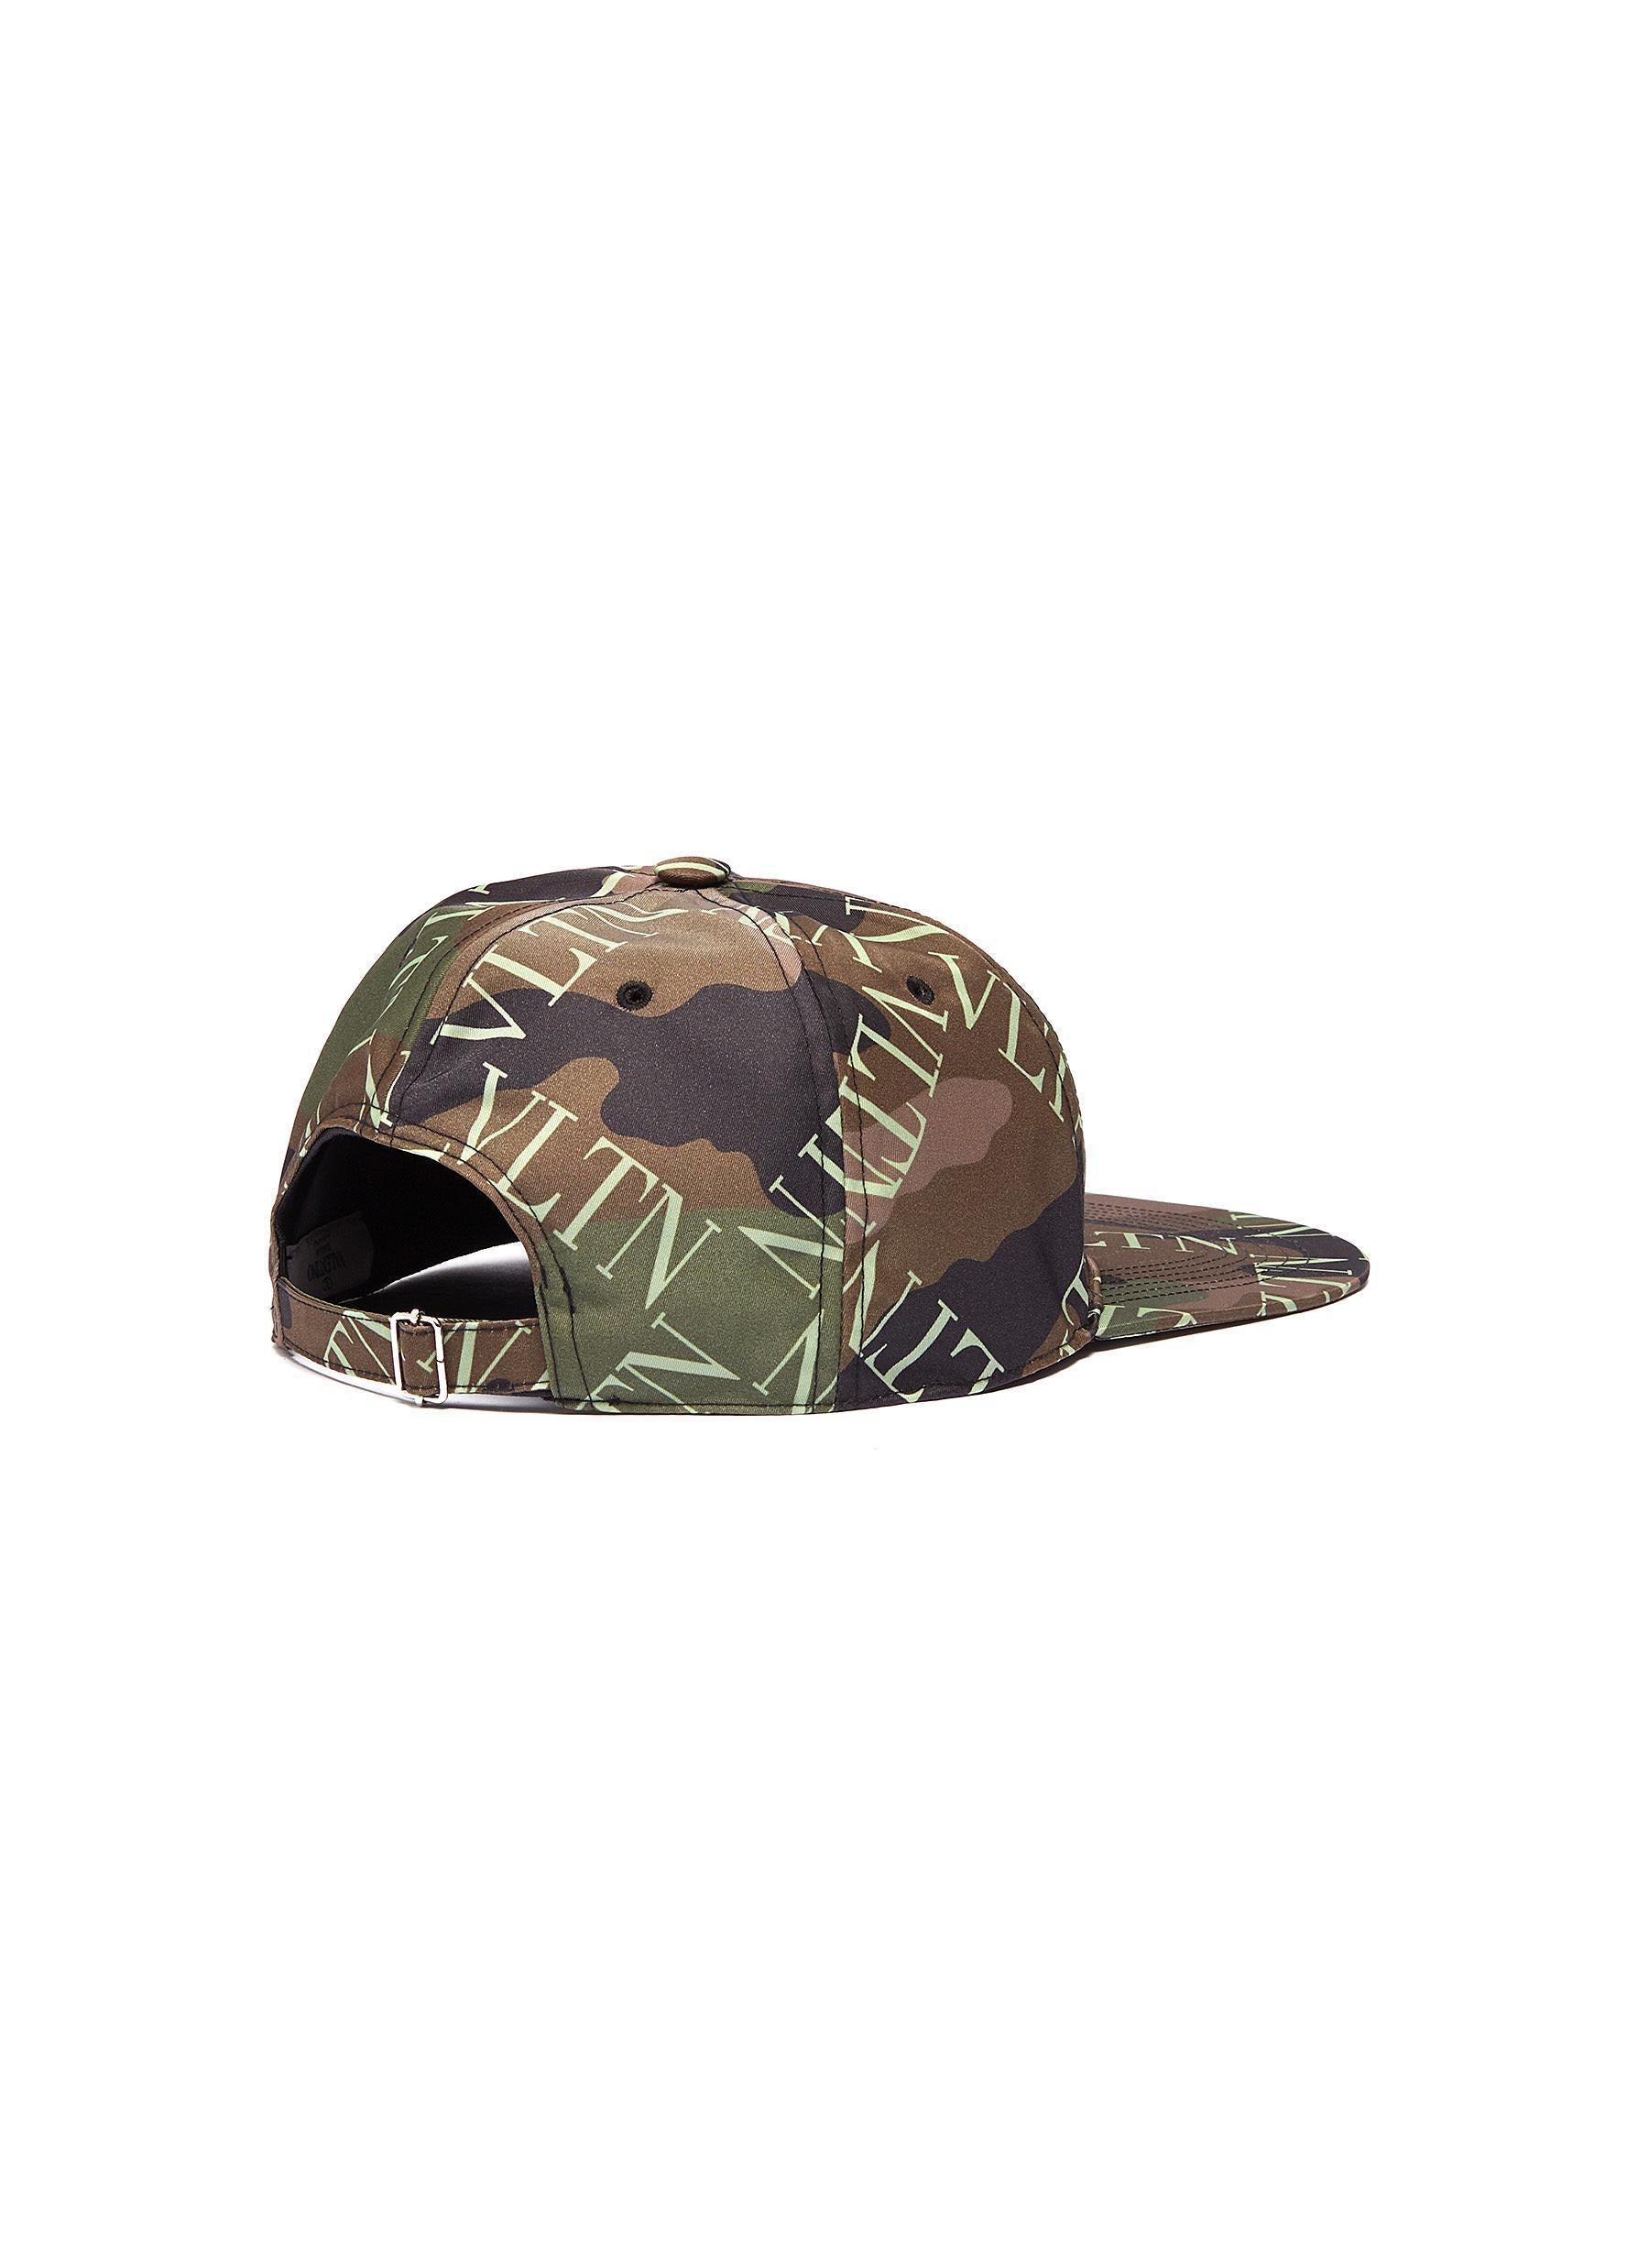 All-over camouflage pattern
VLTN logo grid print detail throughout
Ventilation holes on the top
Adjuster strap at the rear
91% Nylon, 9% Acrylic
Lining: 100% Cotton
Made in Italy, 2020